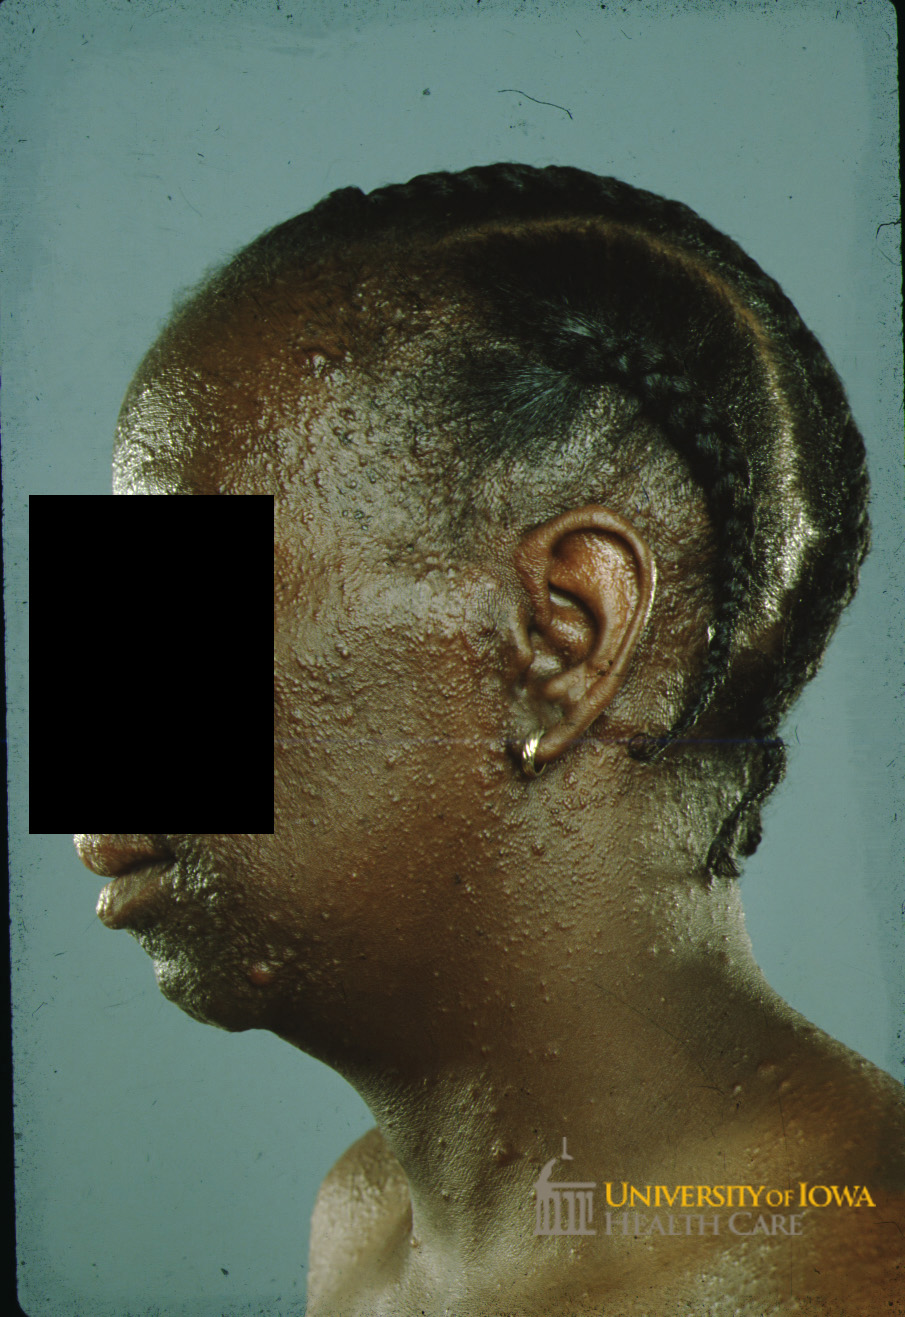 Diffuse skin-colored to pink papules and nodules on the face and neck. (click images for higher resolution).